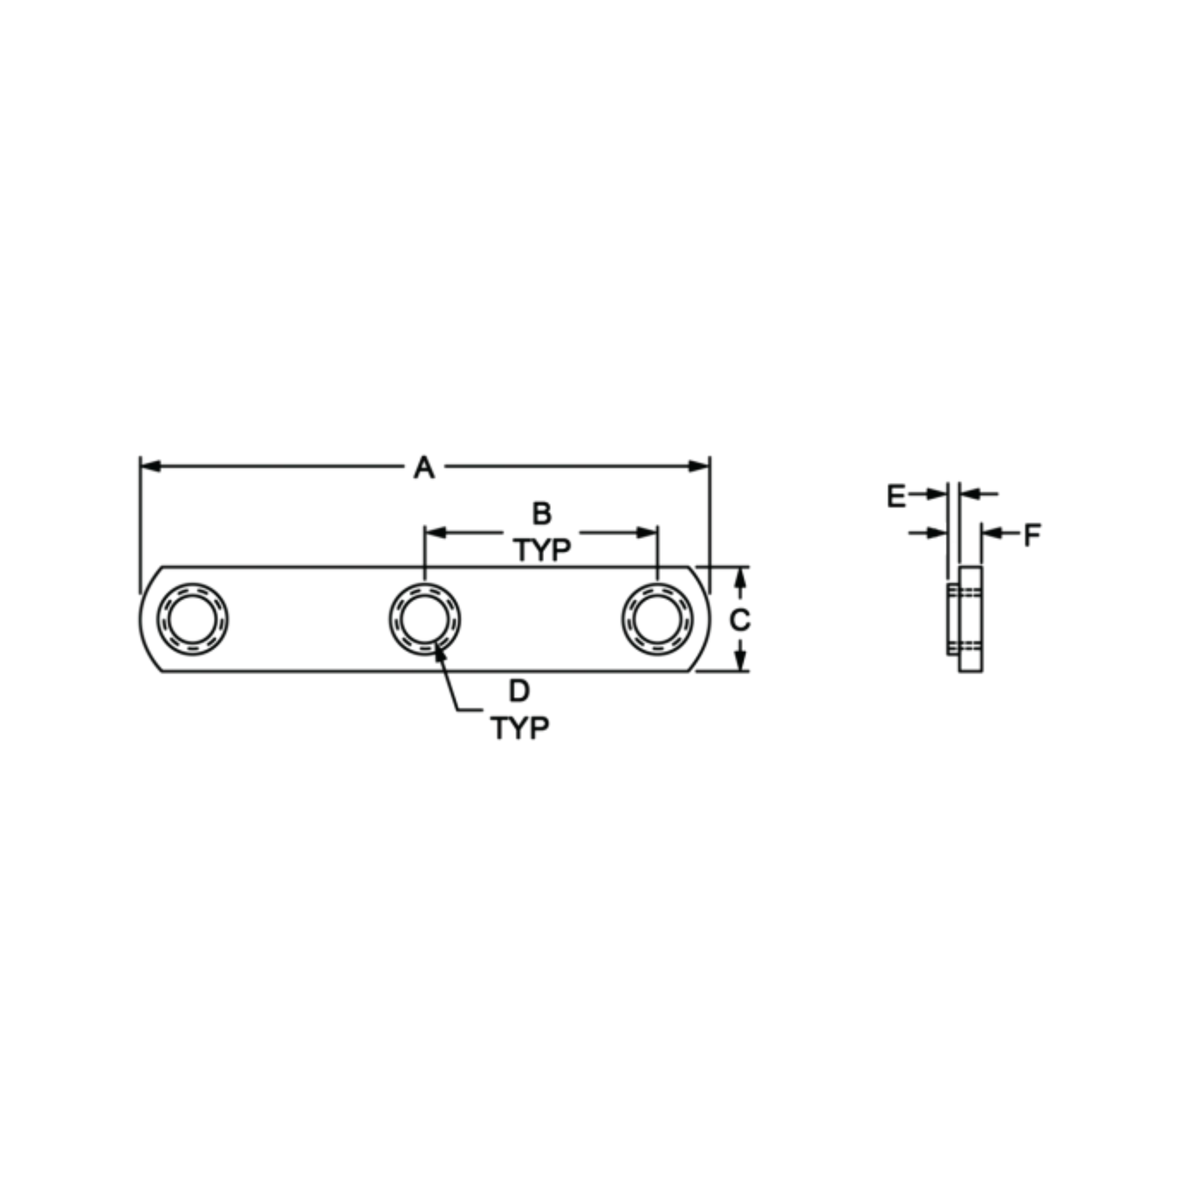 diagram of a t-nut